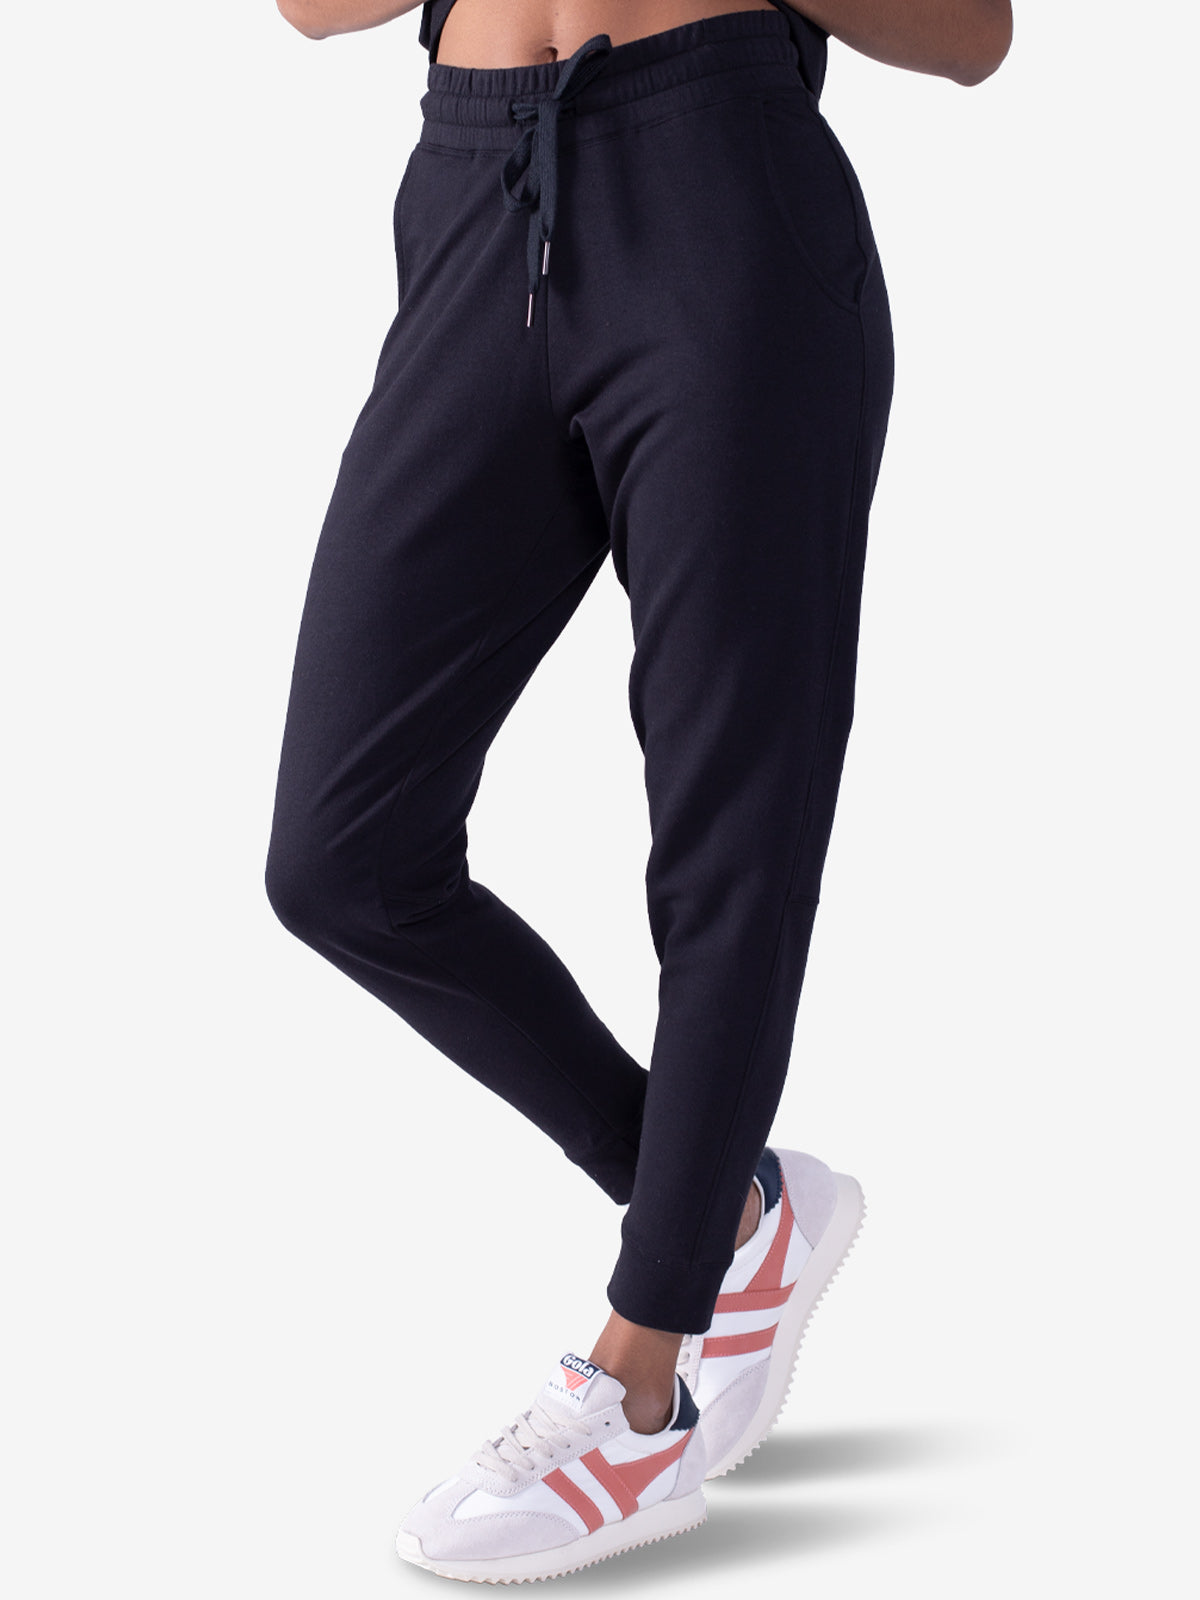 NEW Lole Women's High-Rise Stretch Pant, Lounge Pant, Jogger